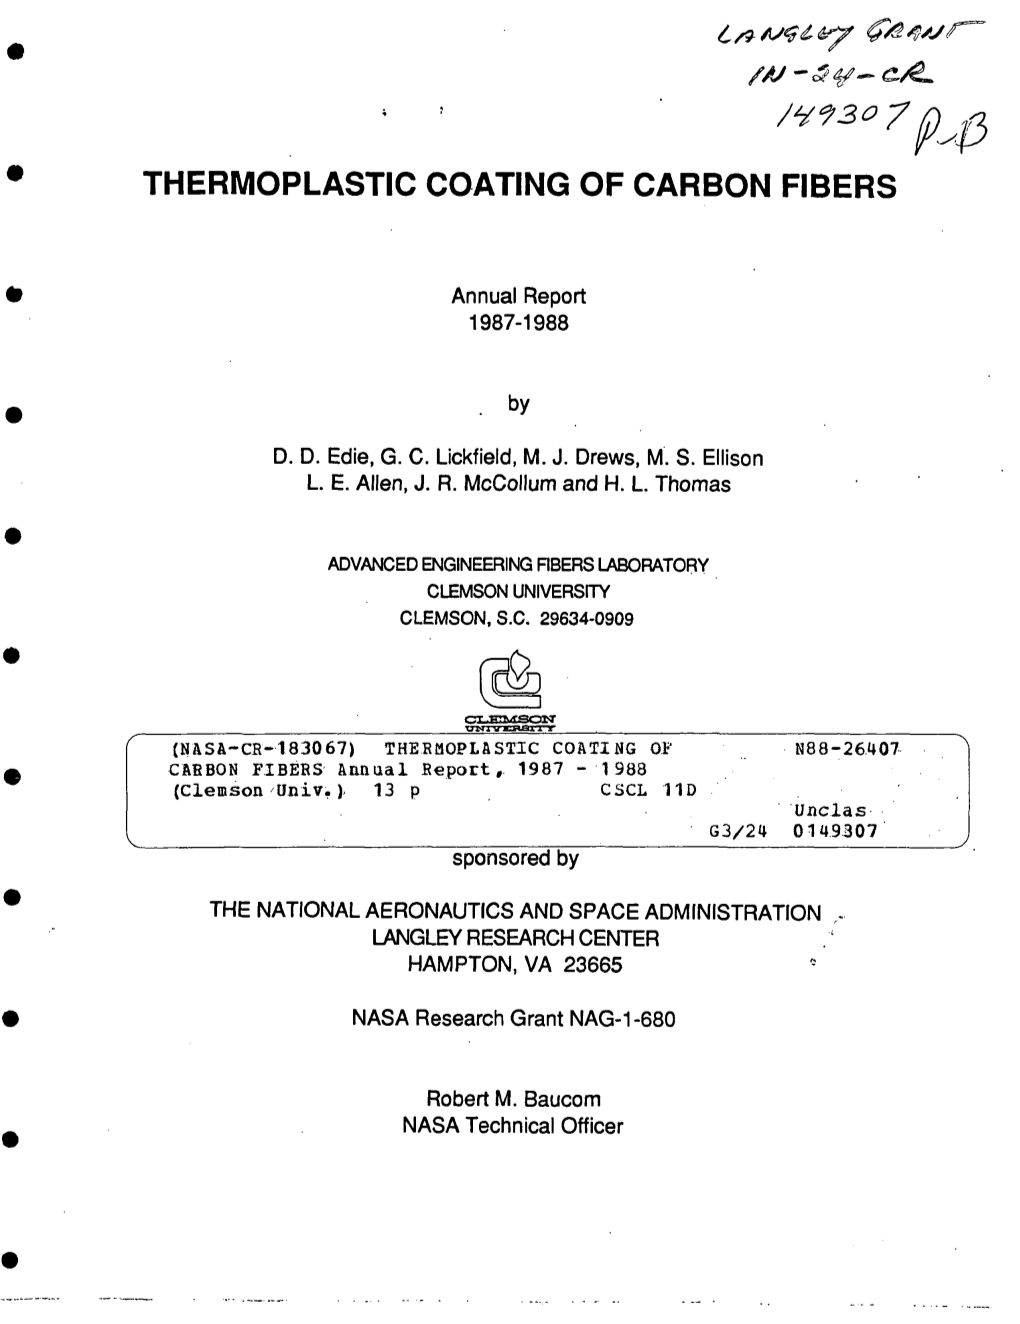 Thermoplastic Coating of Carbon Fibers